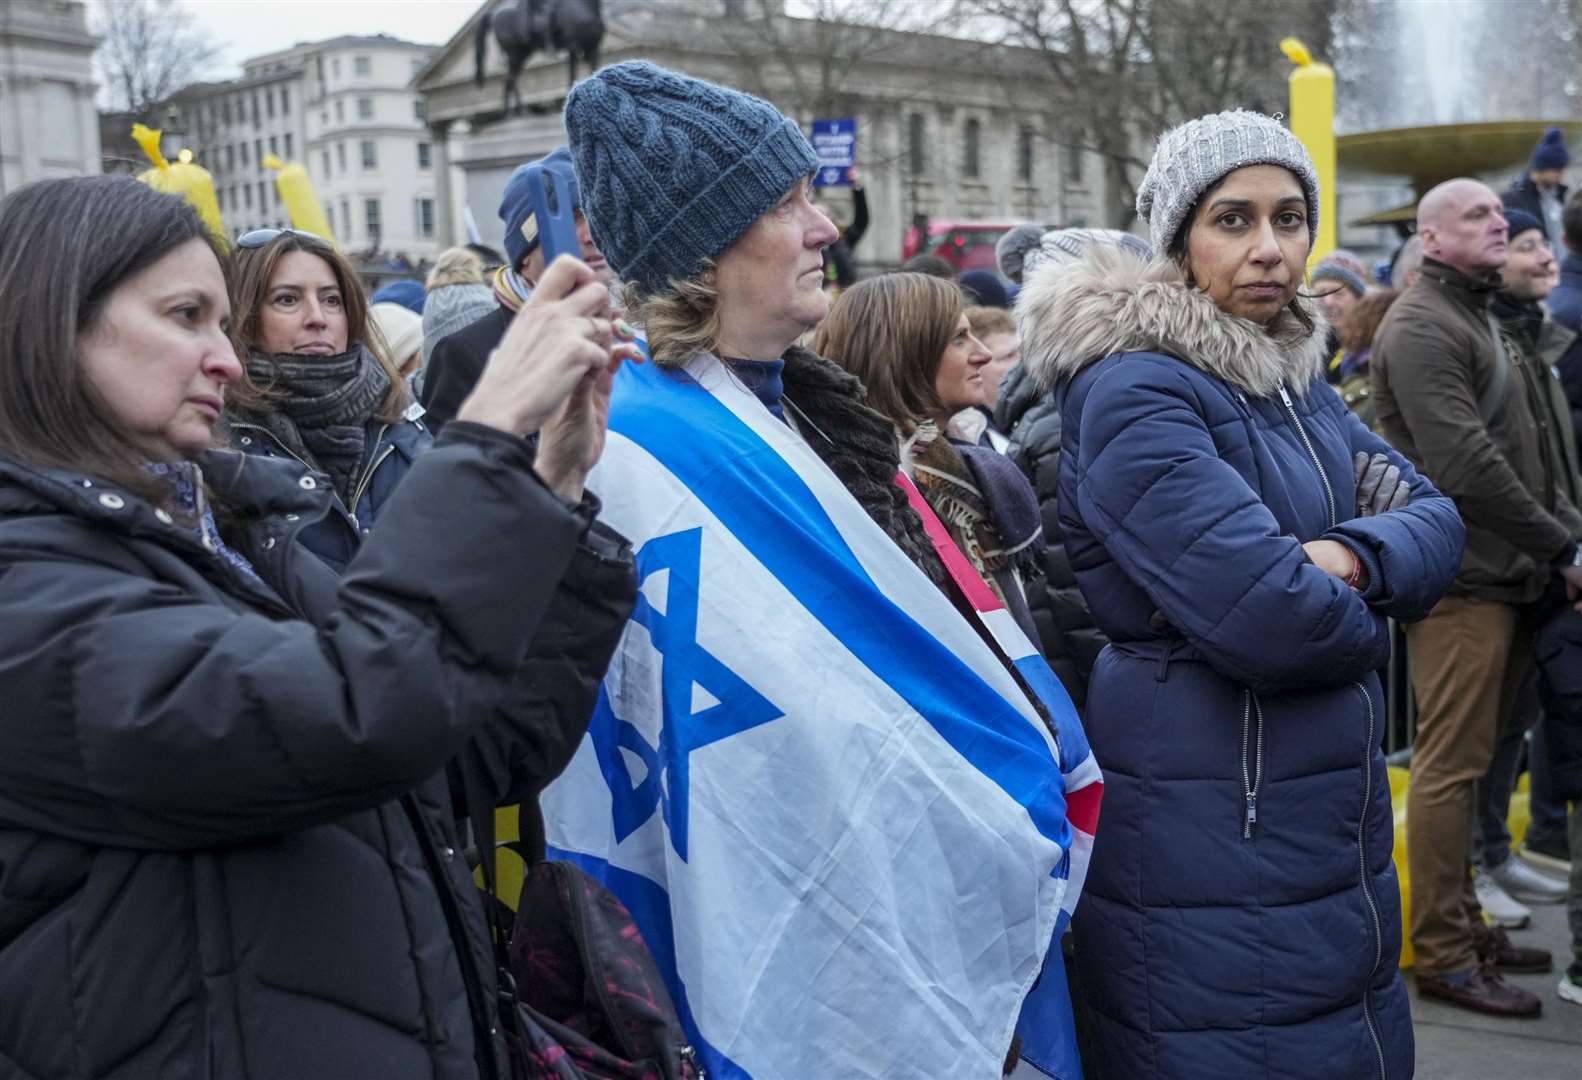 Former home secretary Suella Braverman in the crowd during a pro-Israel rally in Trafalgar Square on Sunday (Jeff Moore/PA)